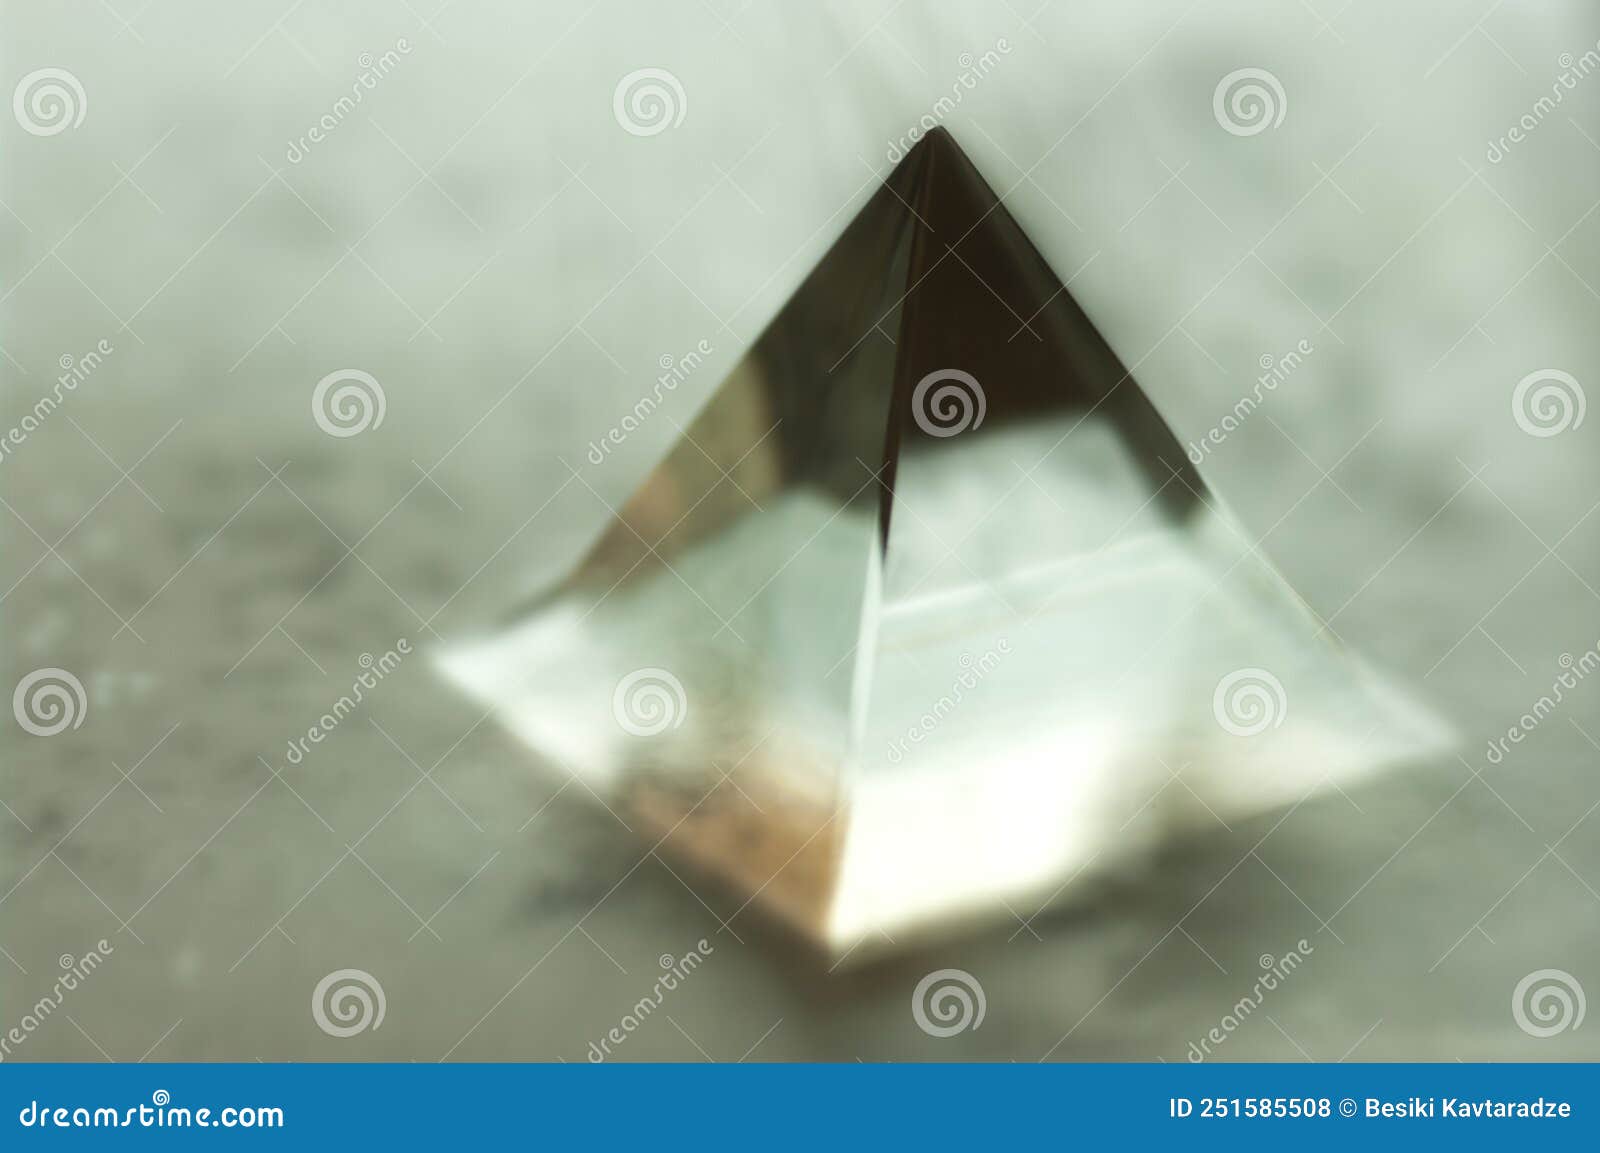 Copper pyramid with lighting, with antique glass vase and stones